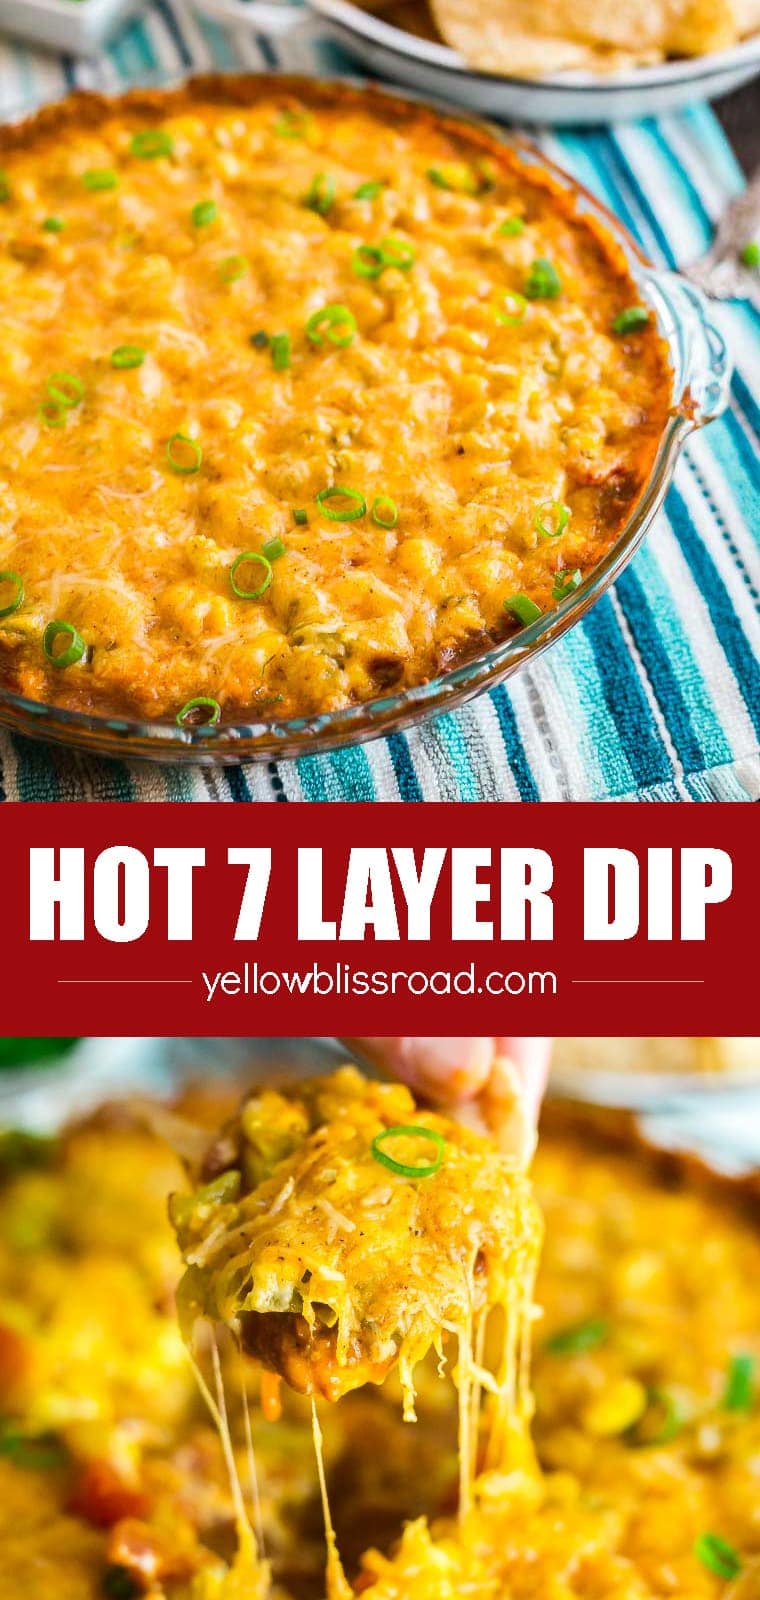 Creamy, Cheesy Hot 7 Layer Bean Dip - The perfect appetizer for game day tailgating and parties! 